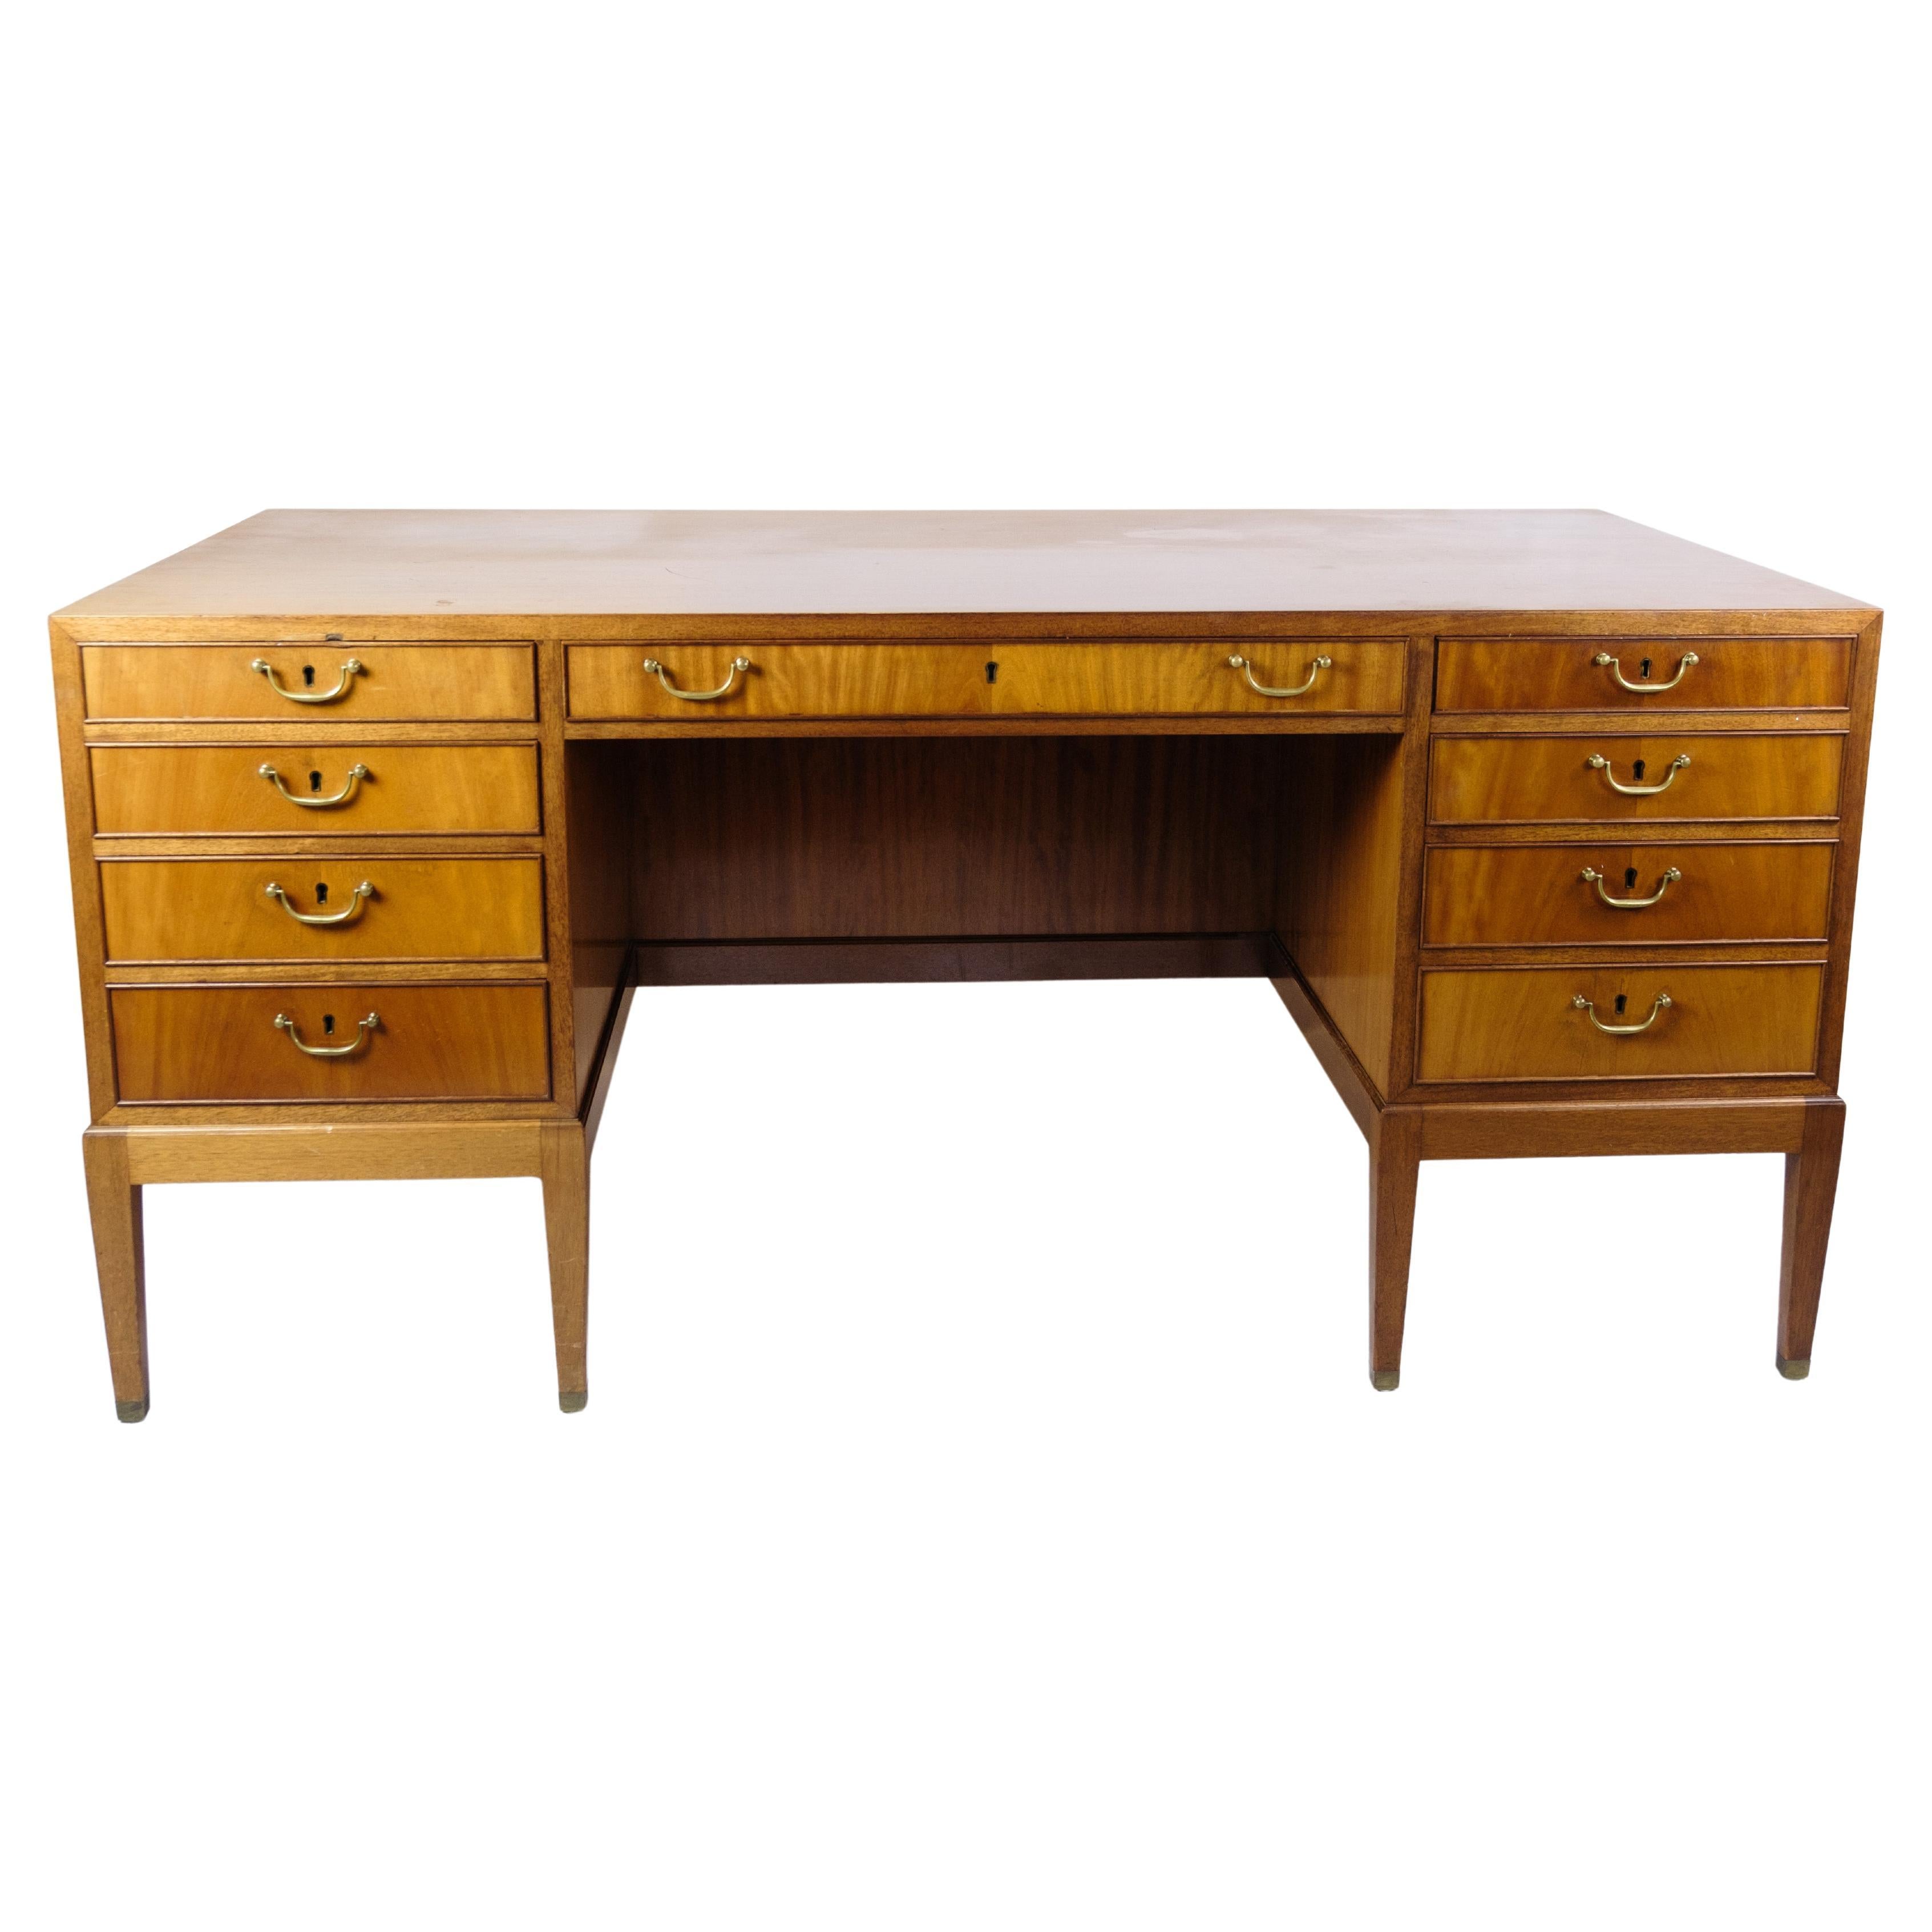 Freestanding Diplomat Desk Made In Mahogany By Fritz Henningsen From 1930s For Sale